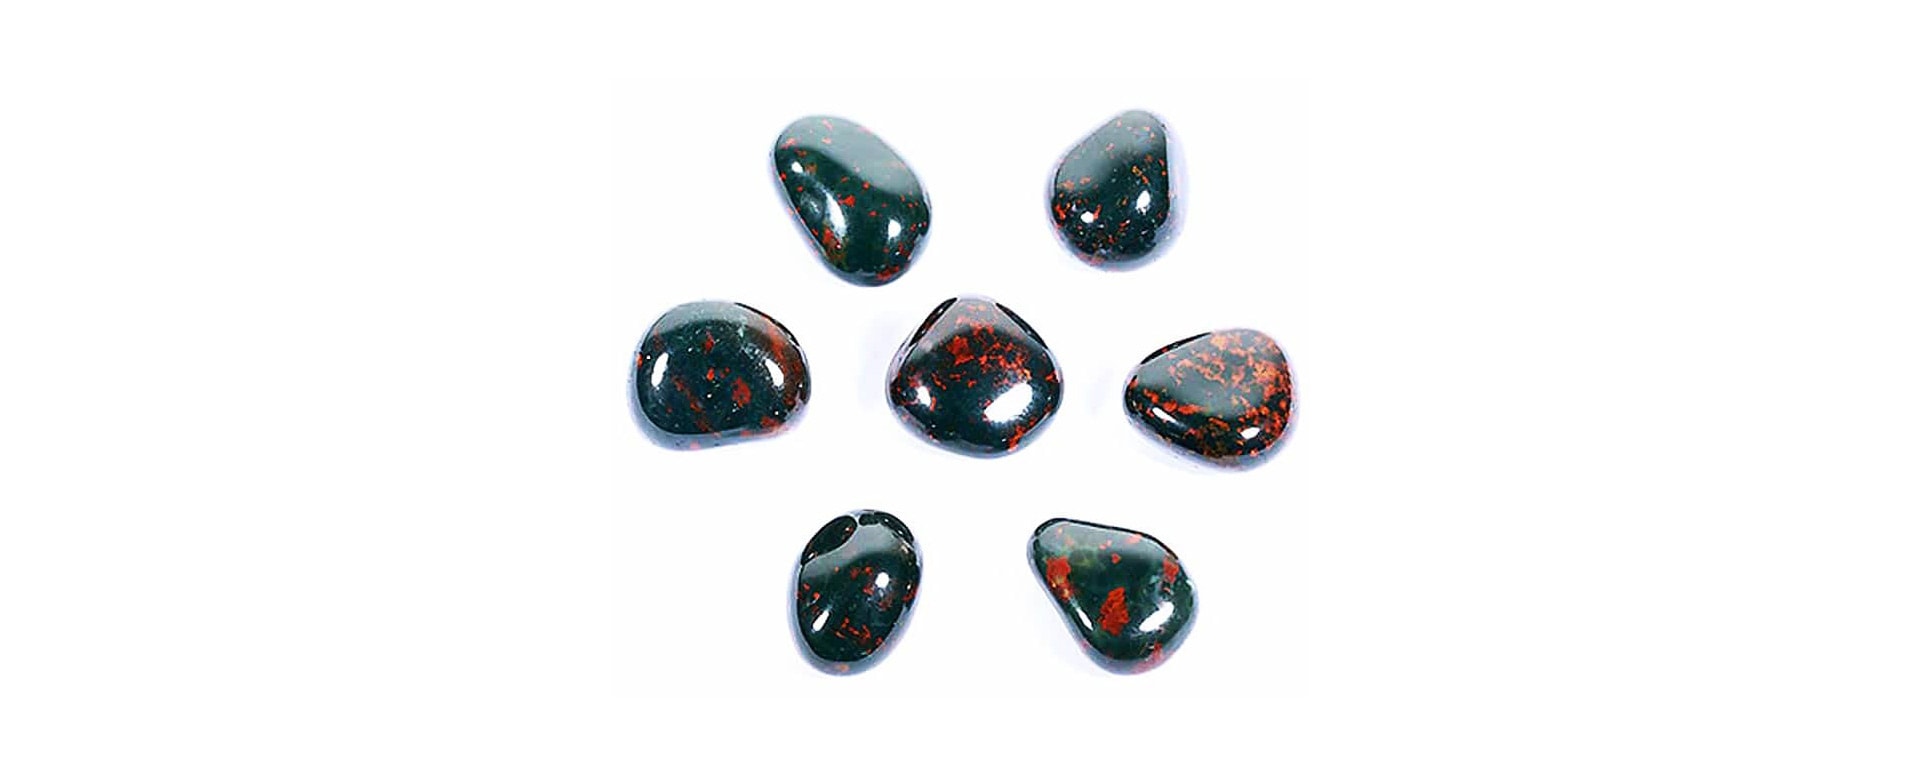 Bloodstone Meaning and Properties 1